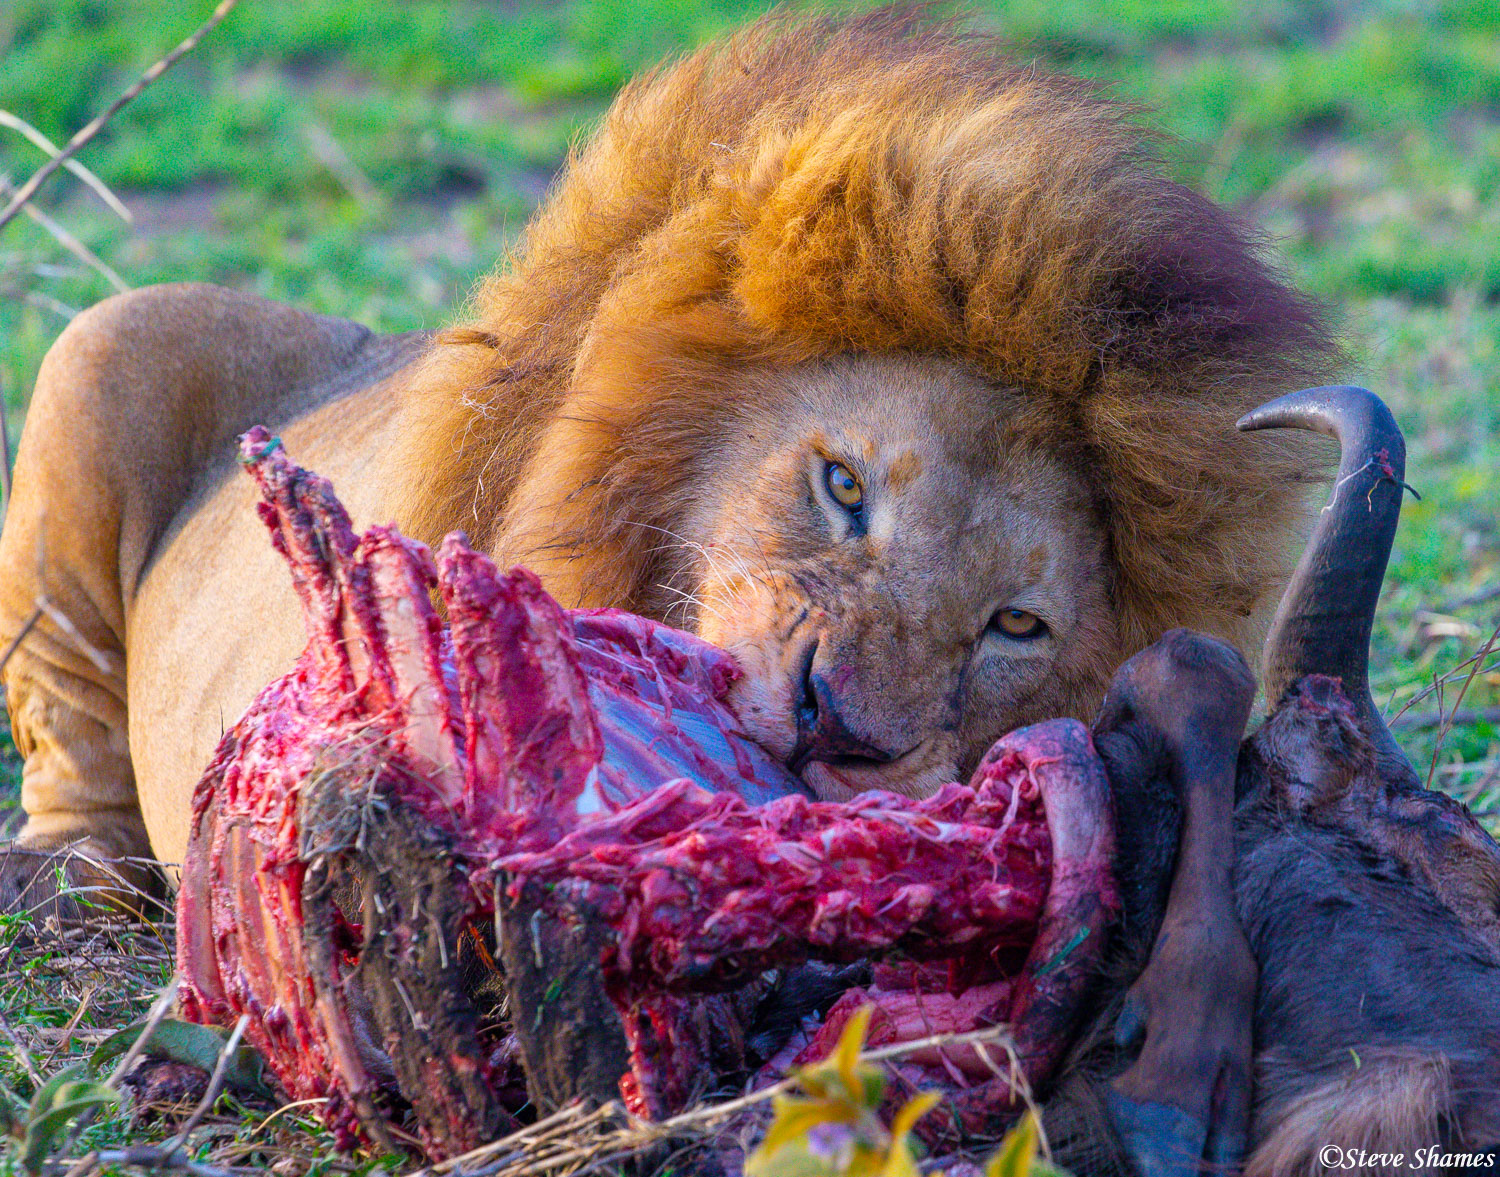 A male lion having a little meal of wildebeest.